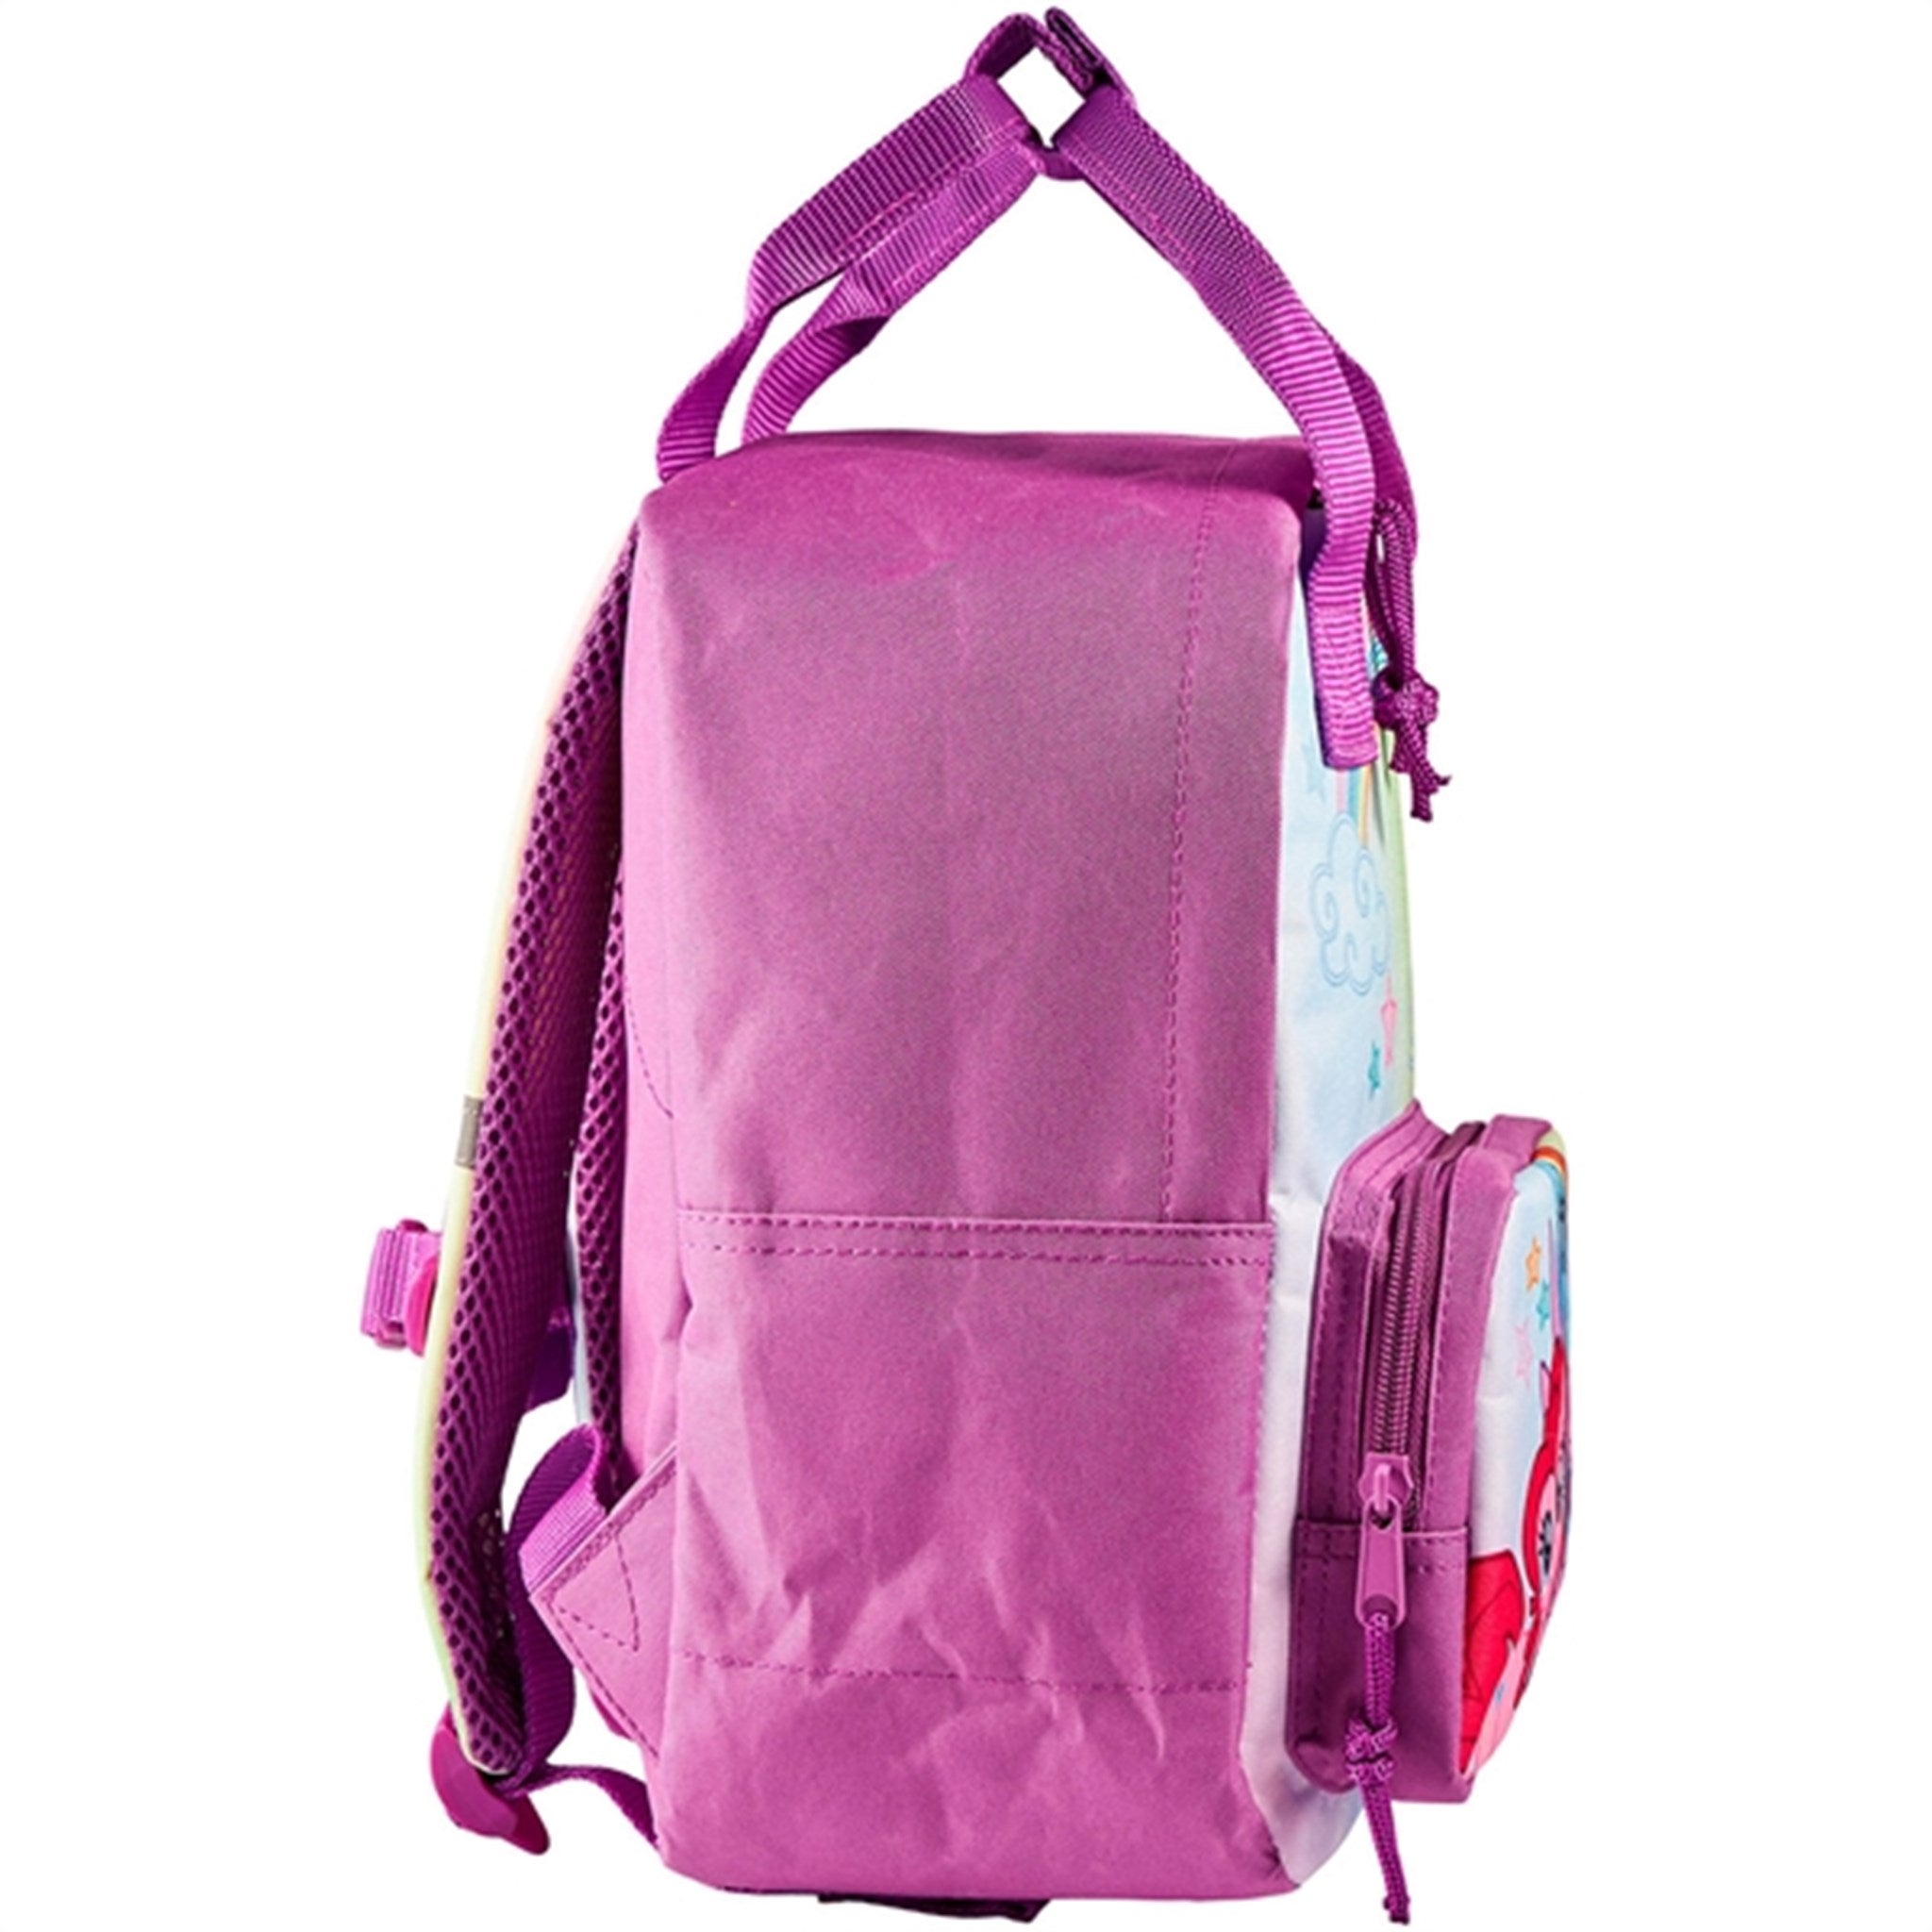 Euromic My Little Pony Backpack 2